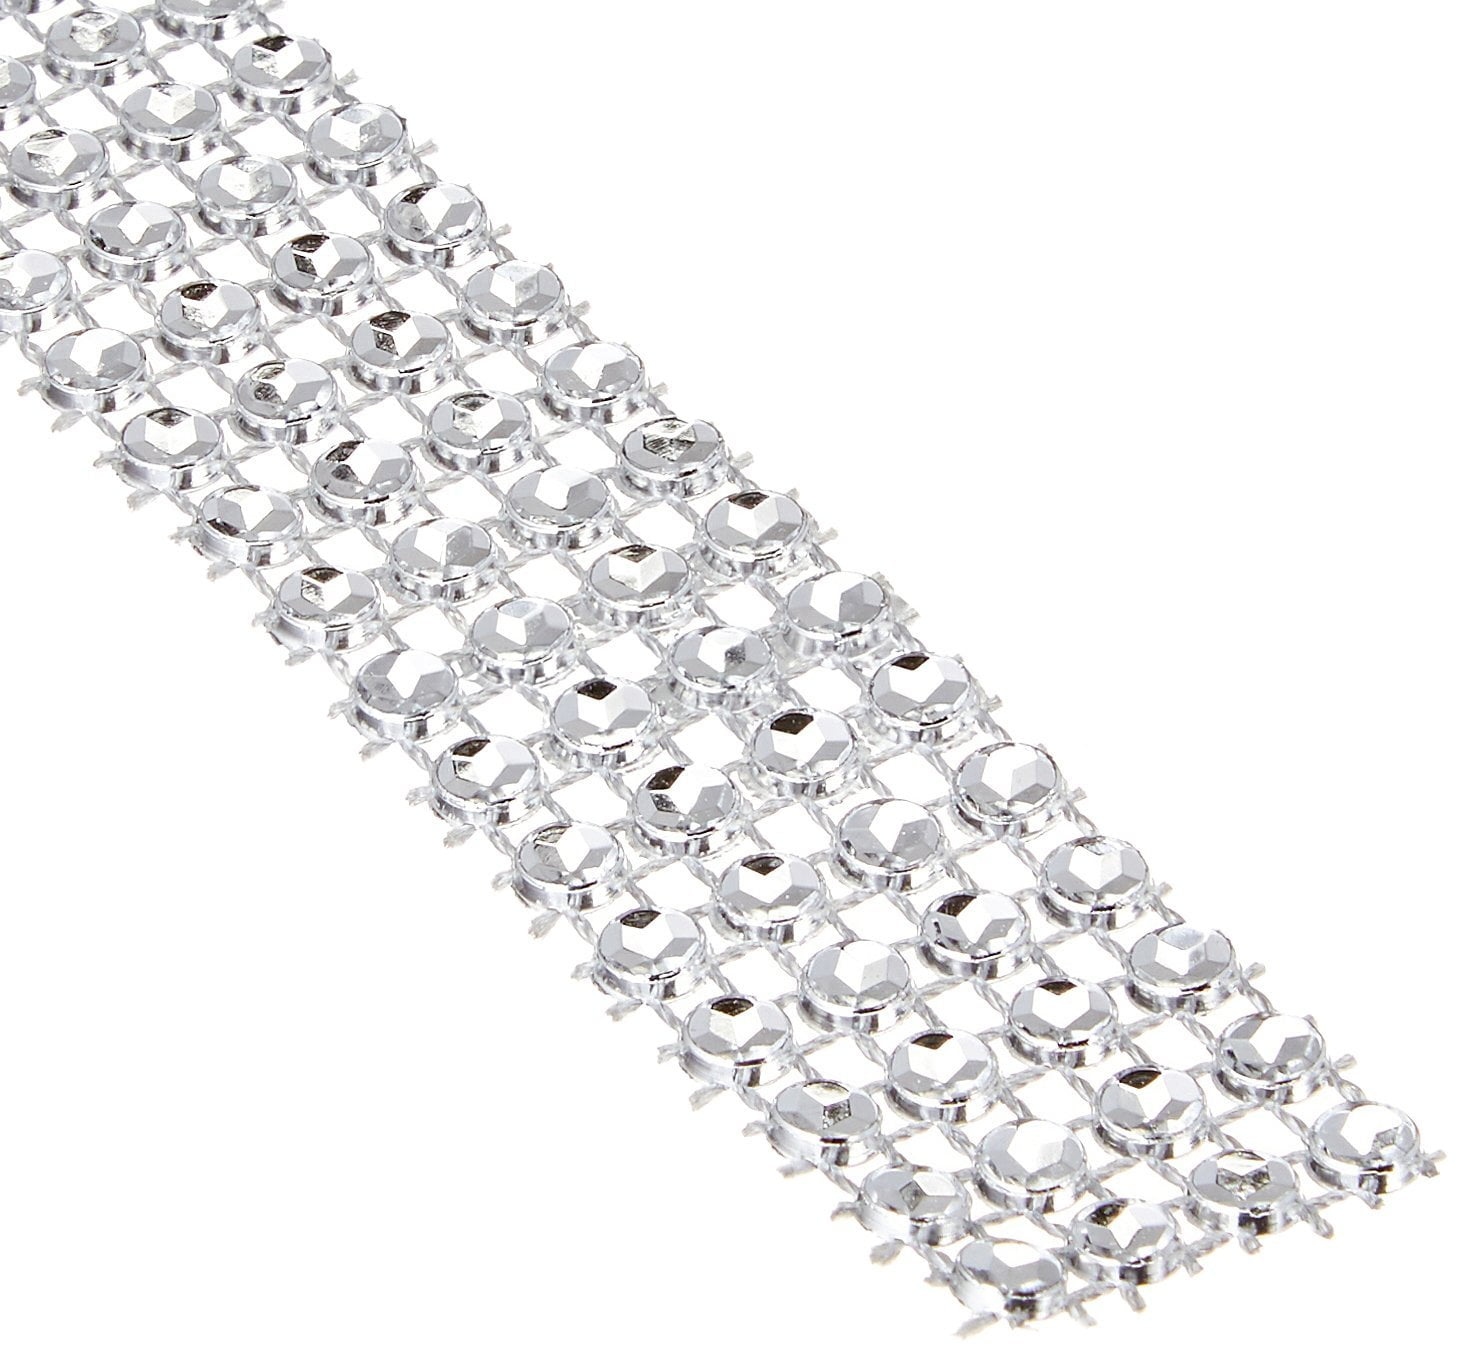 Diamond shape Roll for decoration Aprox.3" Details about   Rhinestone mesh Ribbon 3YARDS 24 rows 